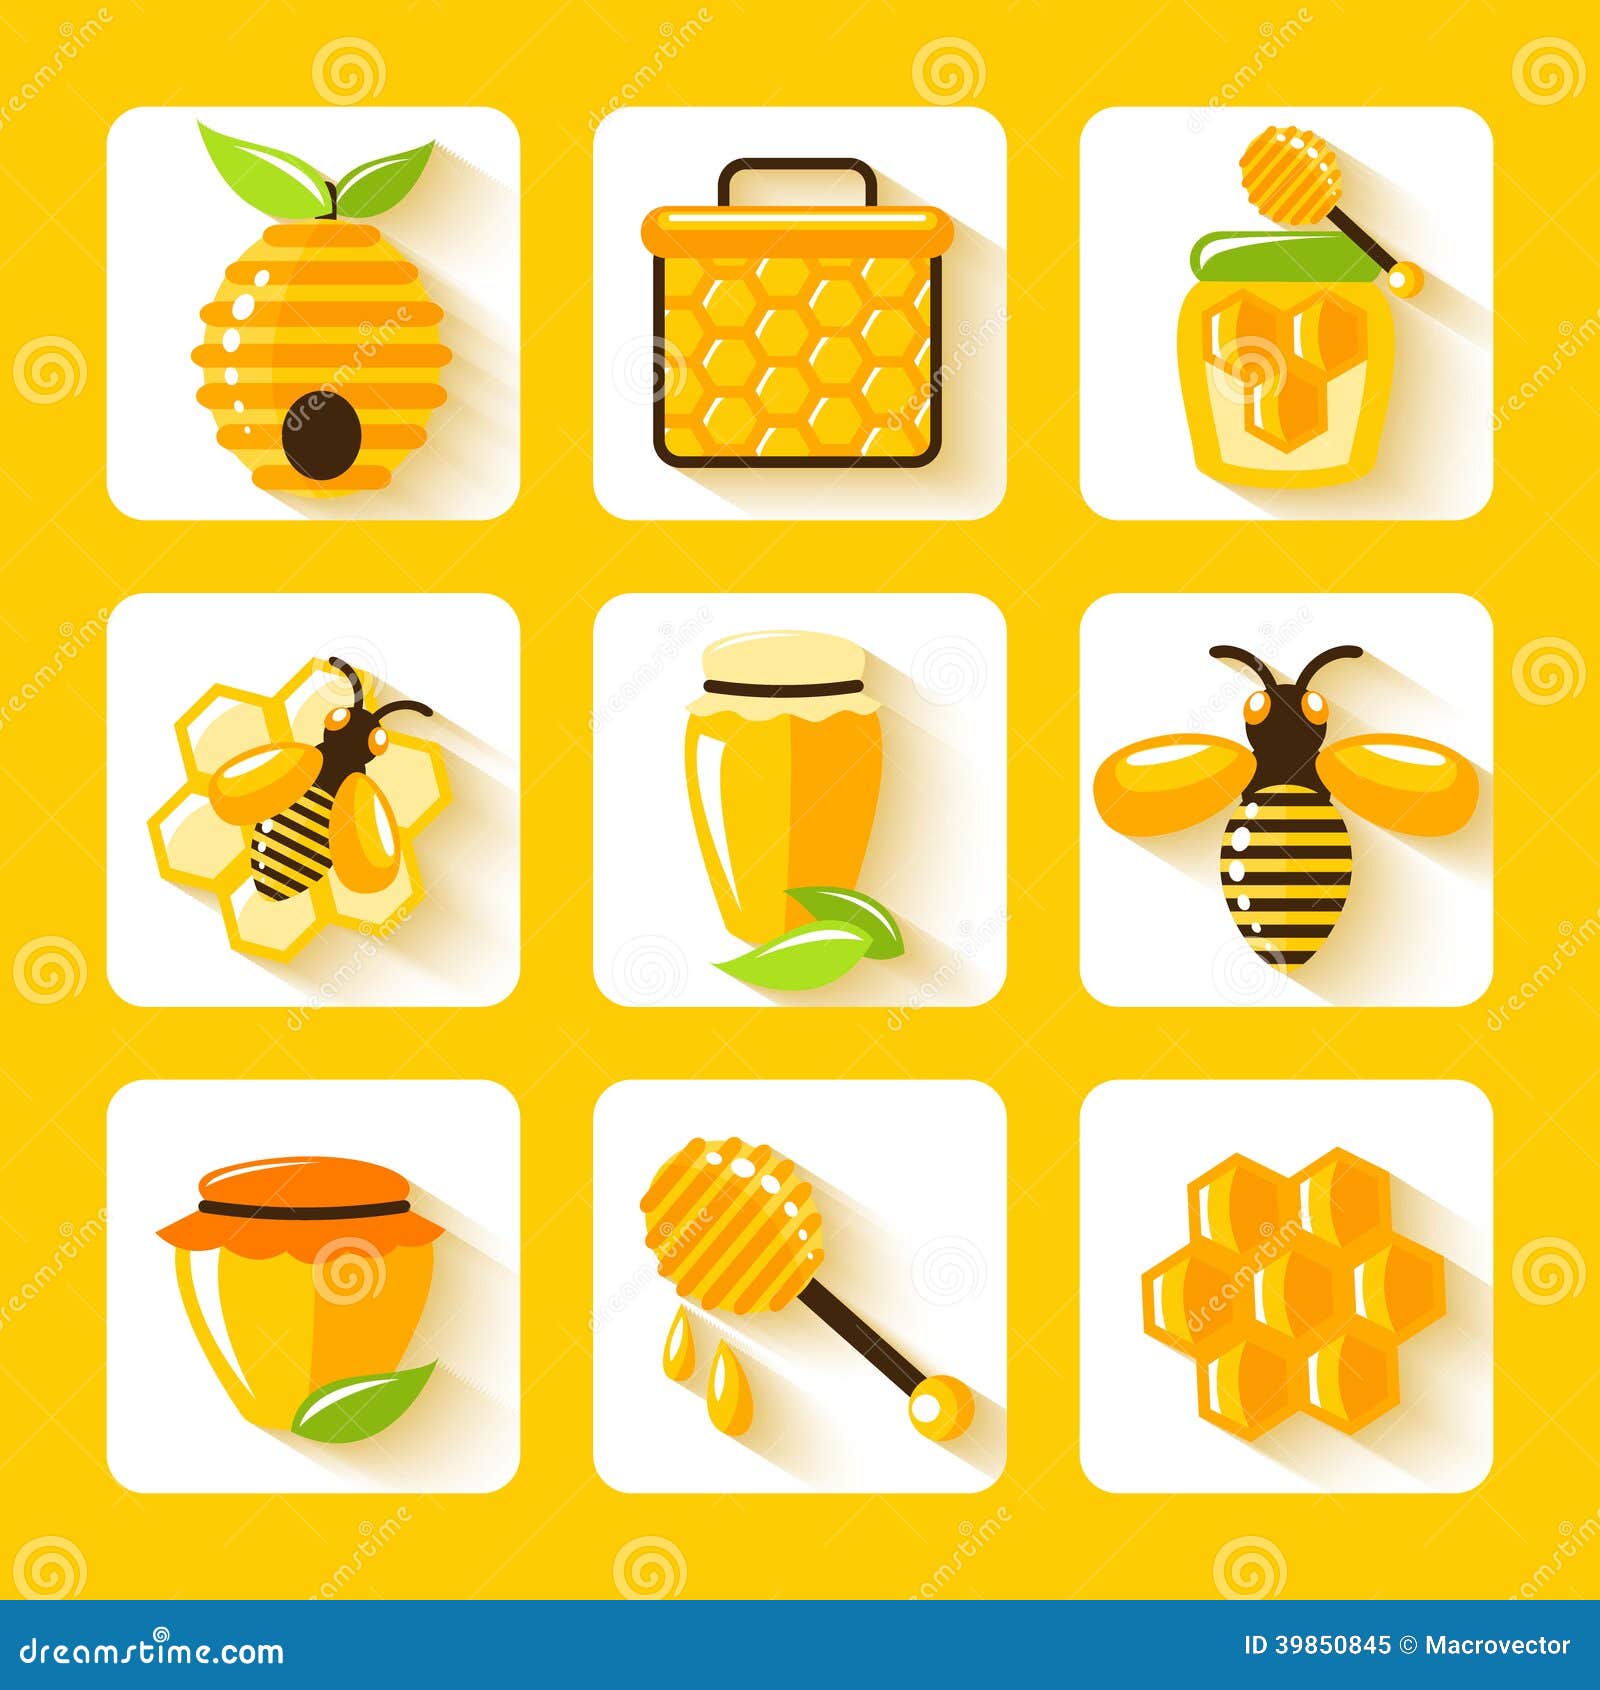 Honey drop comb bee hive and cell food agriculture flat icons set 